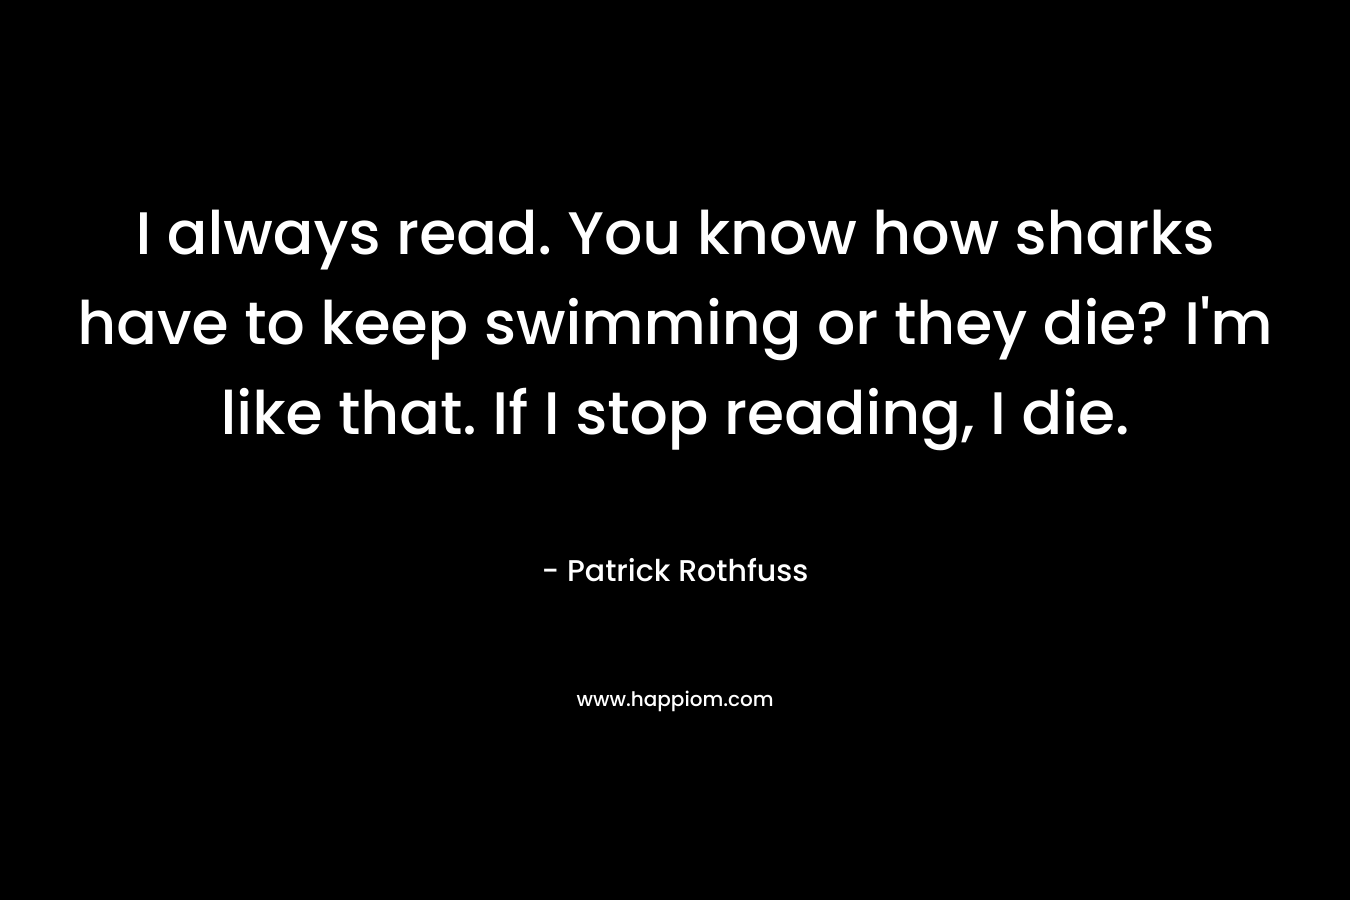 I always read. You know how sharks have to keep swimming or they die? I’m like that. If I stop reading, I die. – Patrick Rothfuss